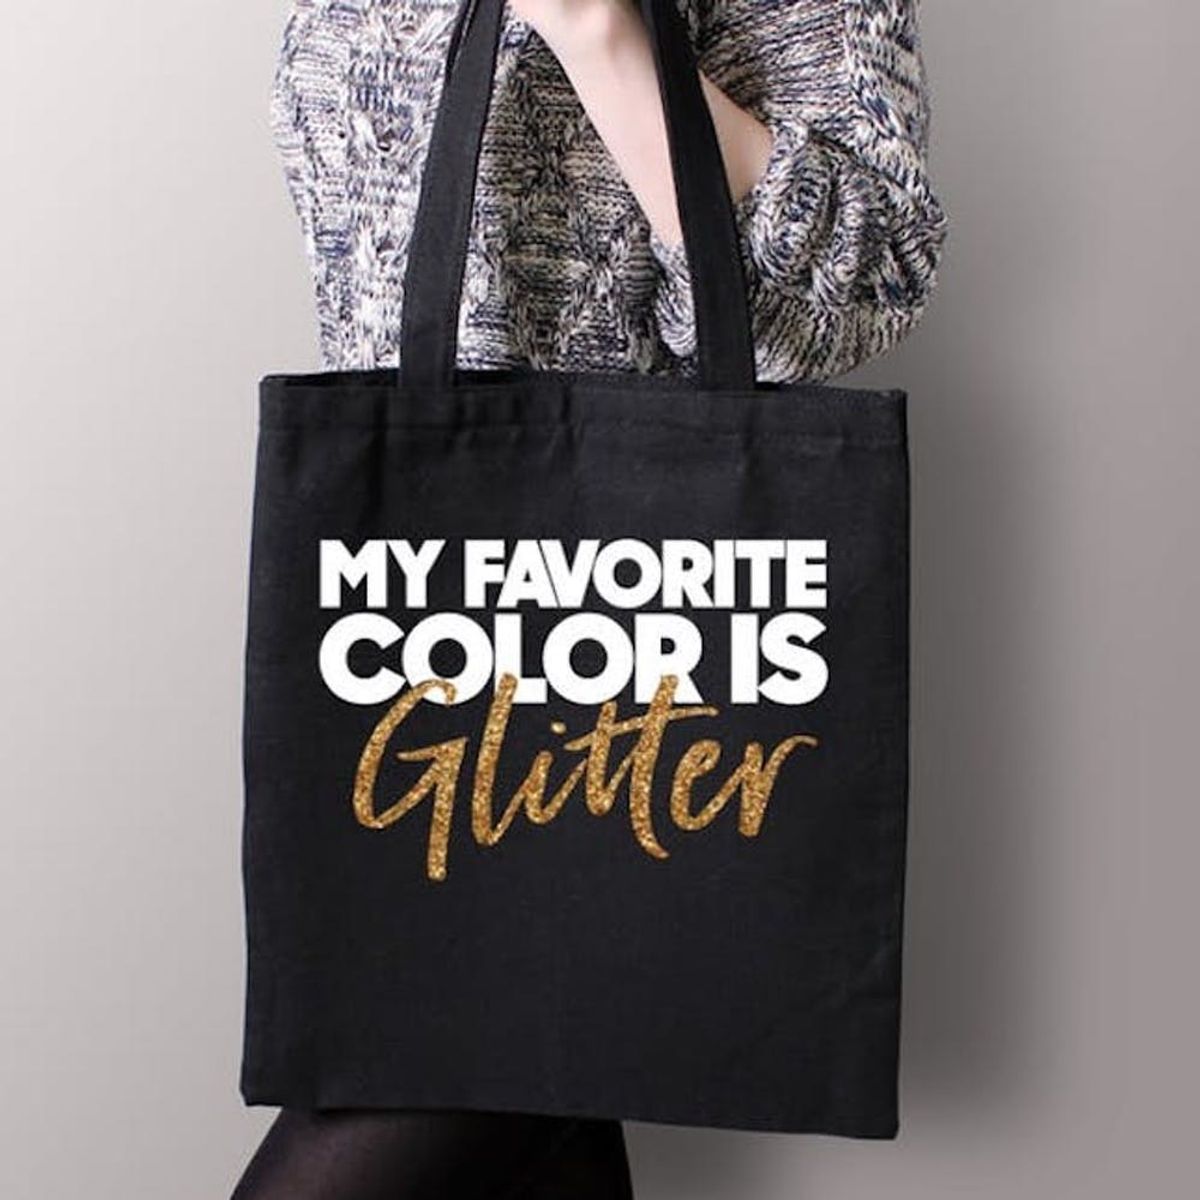 This Tote Bag’s Unfortunate Typography Choice Appears to Spell Hitler